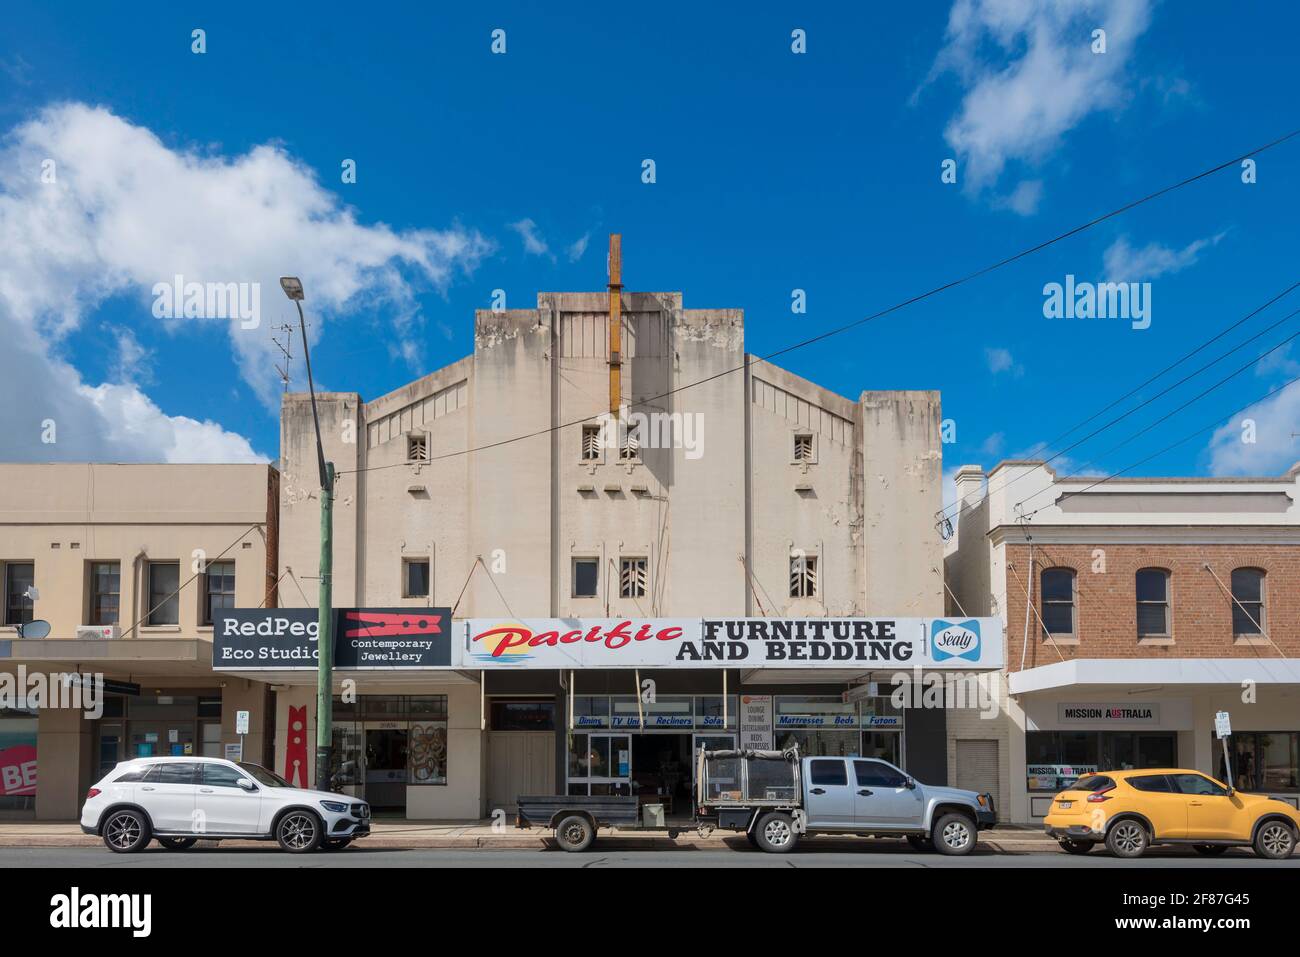 The Kings Theatre in the south coast town of Bega, New South Wales is a 3 storey art deco brick building built in 1936 designed by Kaberry and Chard Stock Photo